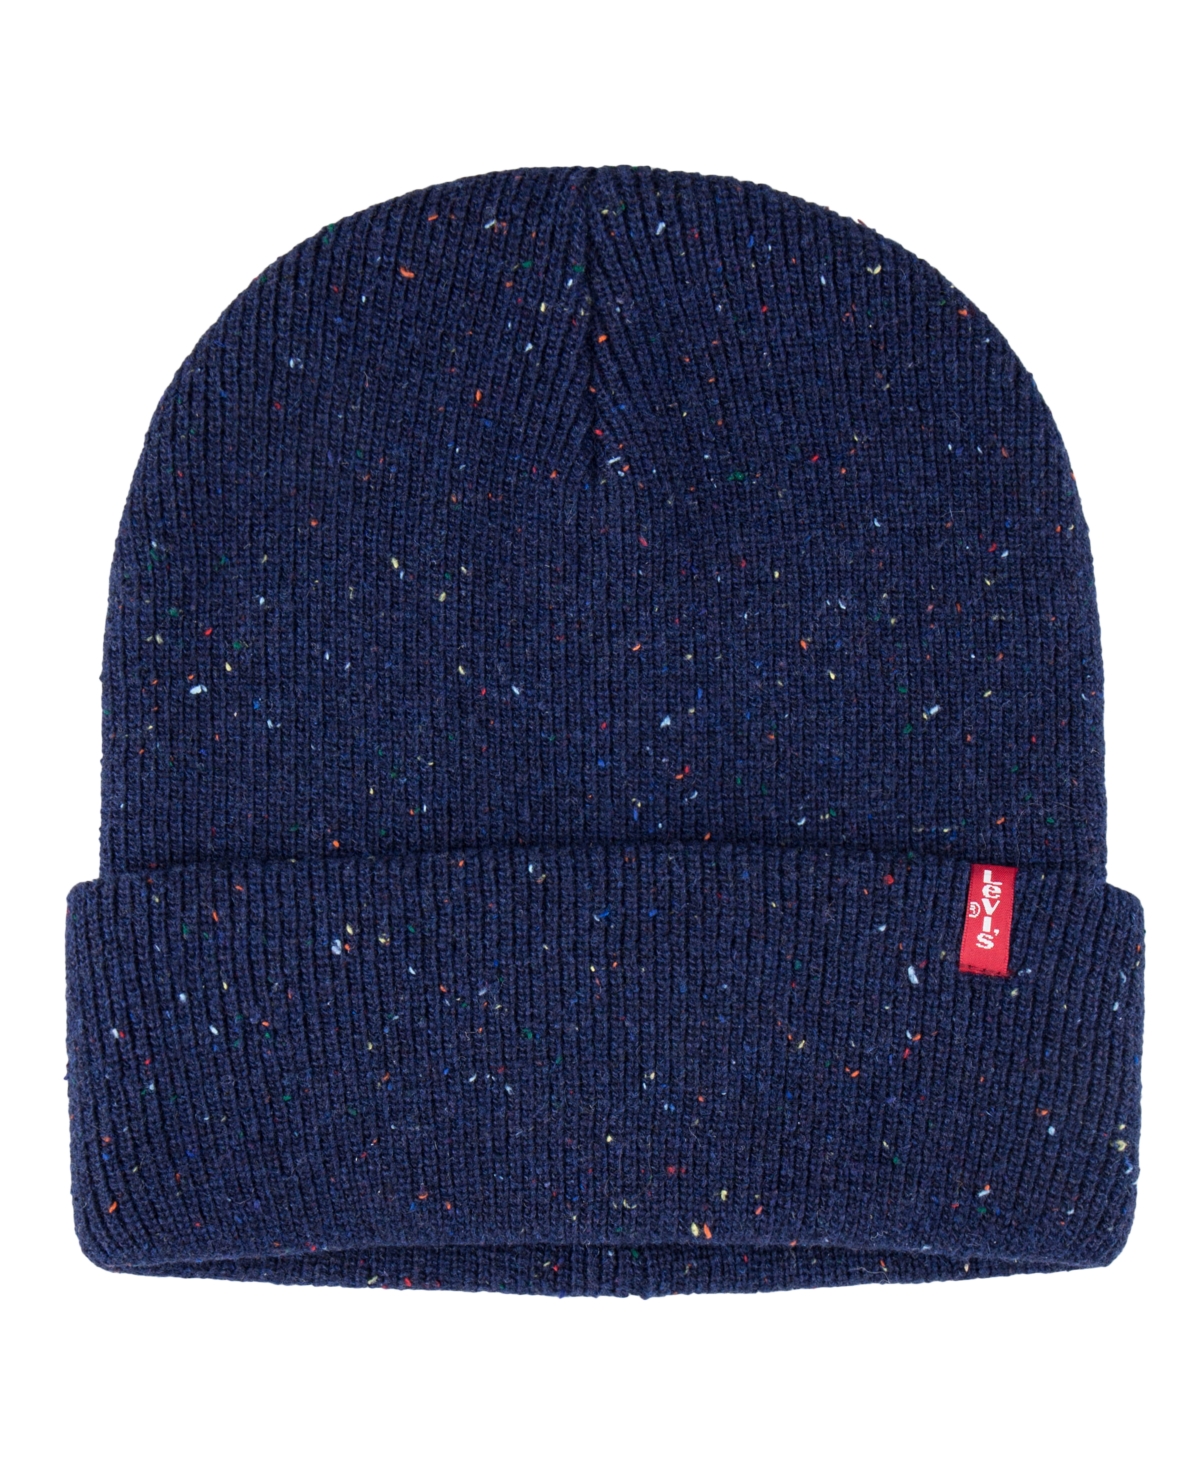 Levi's Men's Speckled Donegal Rib Knit Cuffed Beanie In Navy